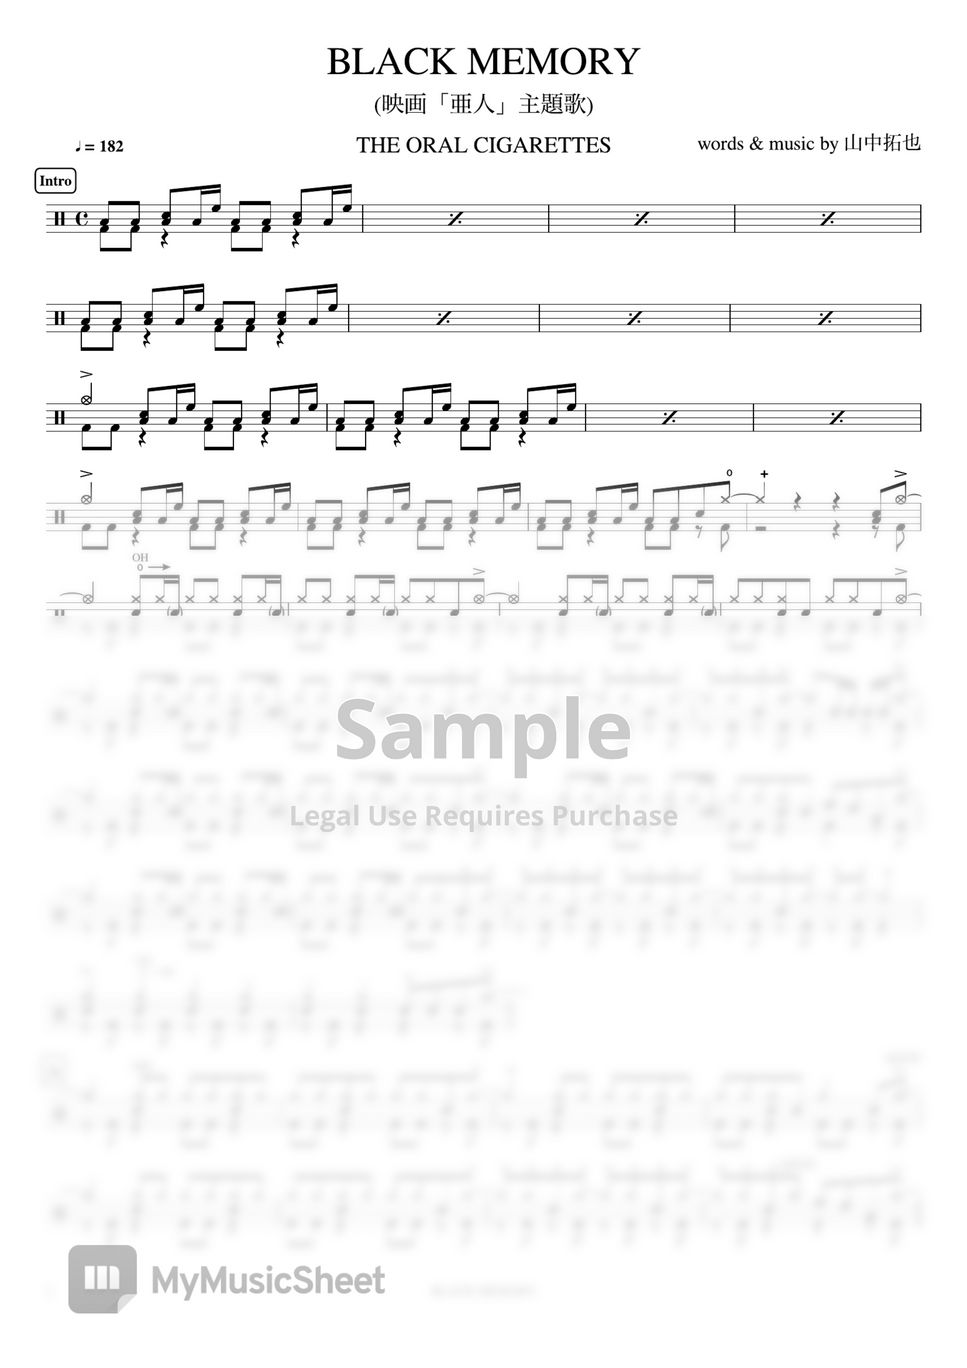 THE ORAL CIGARETTES - BLACK MEMORY (映画「亜人」主題歌) by Cookai's J-pop Drum sheet music!!!